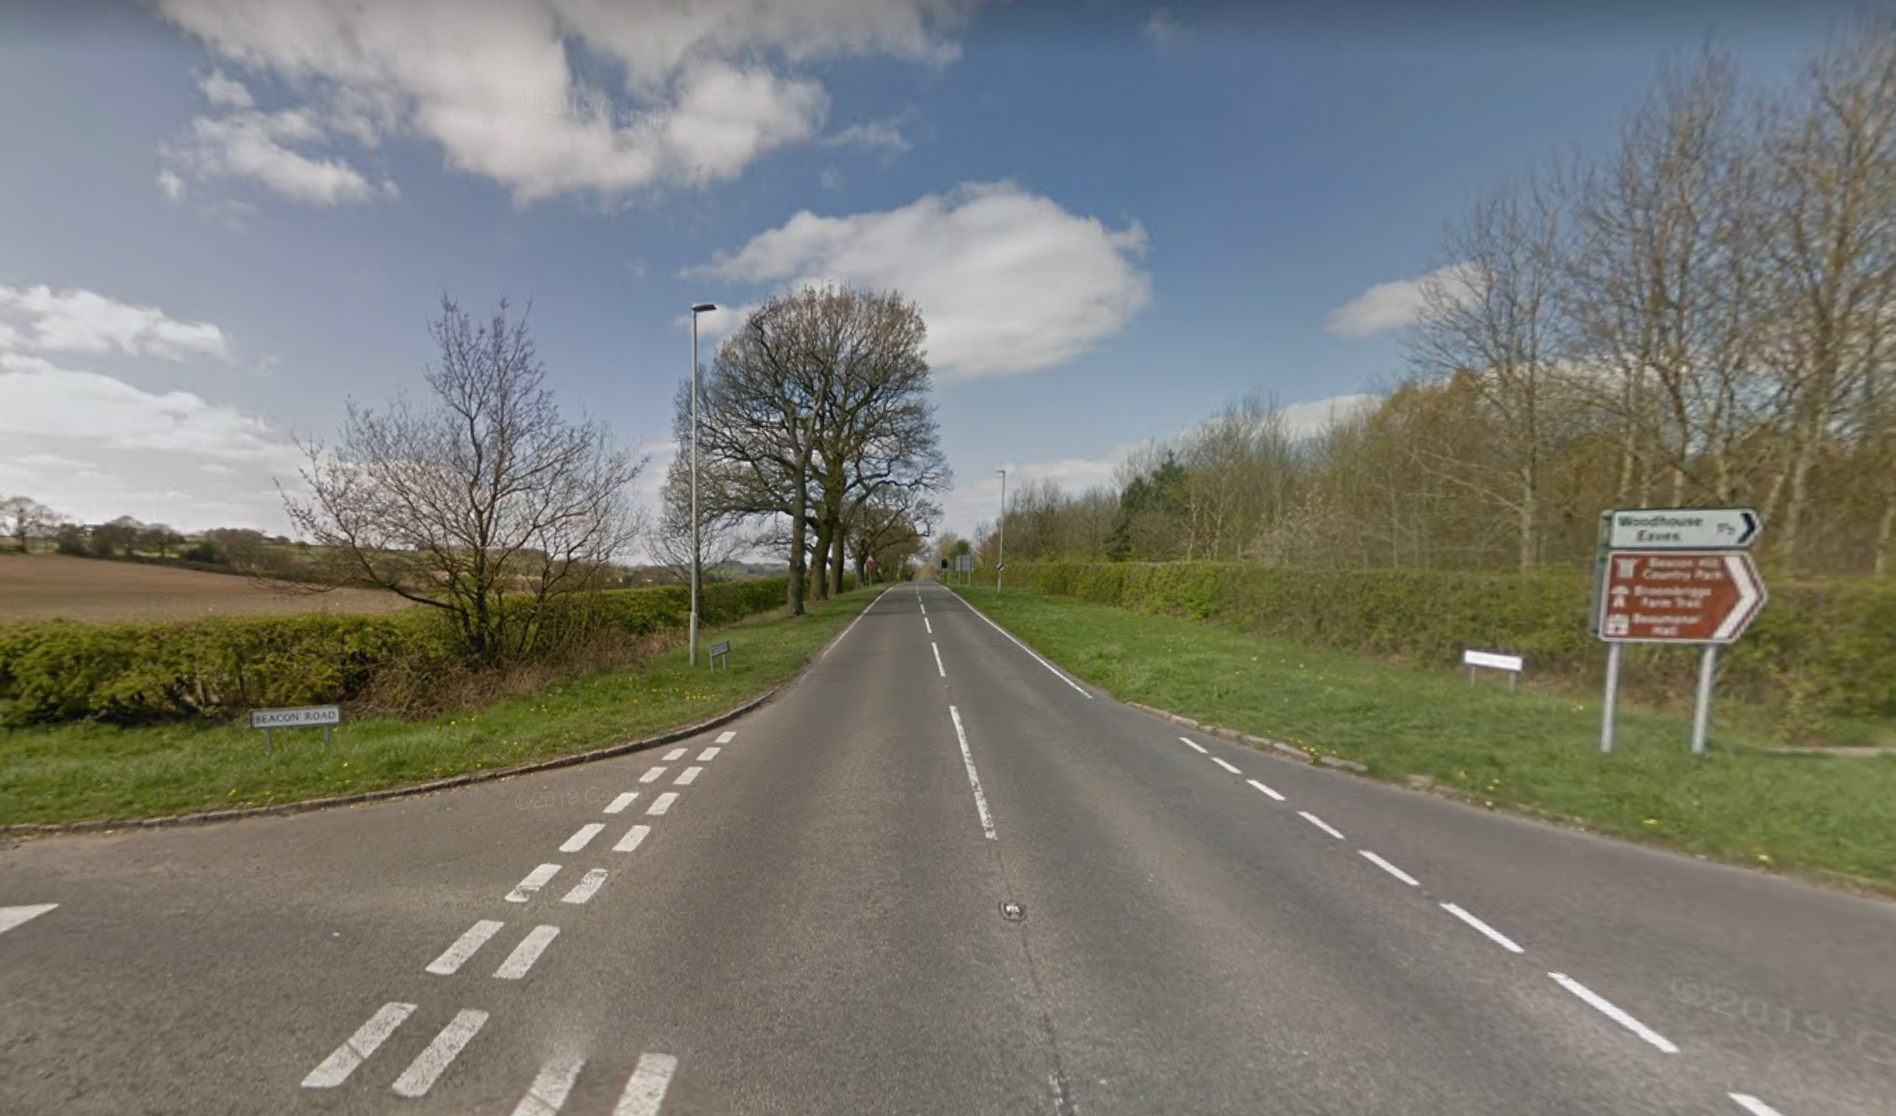 The body of a woman was found on this country road in Leicestershire, near the junction of Charley Road and Beacon Road